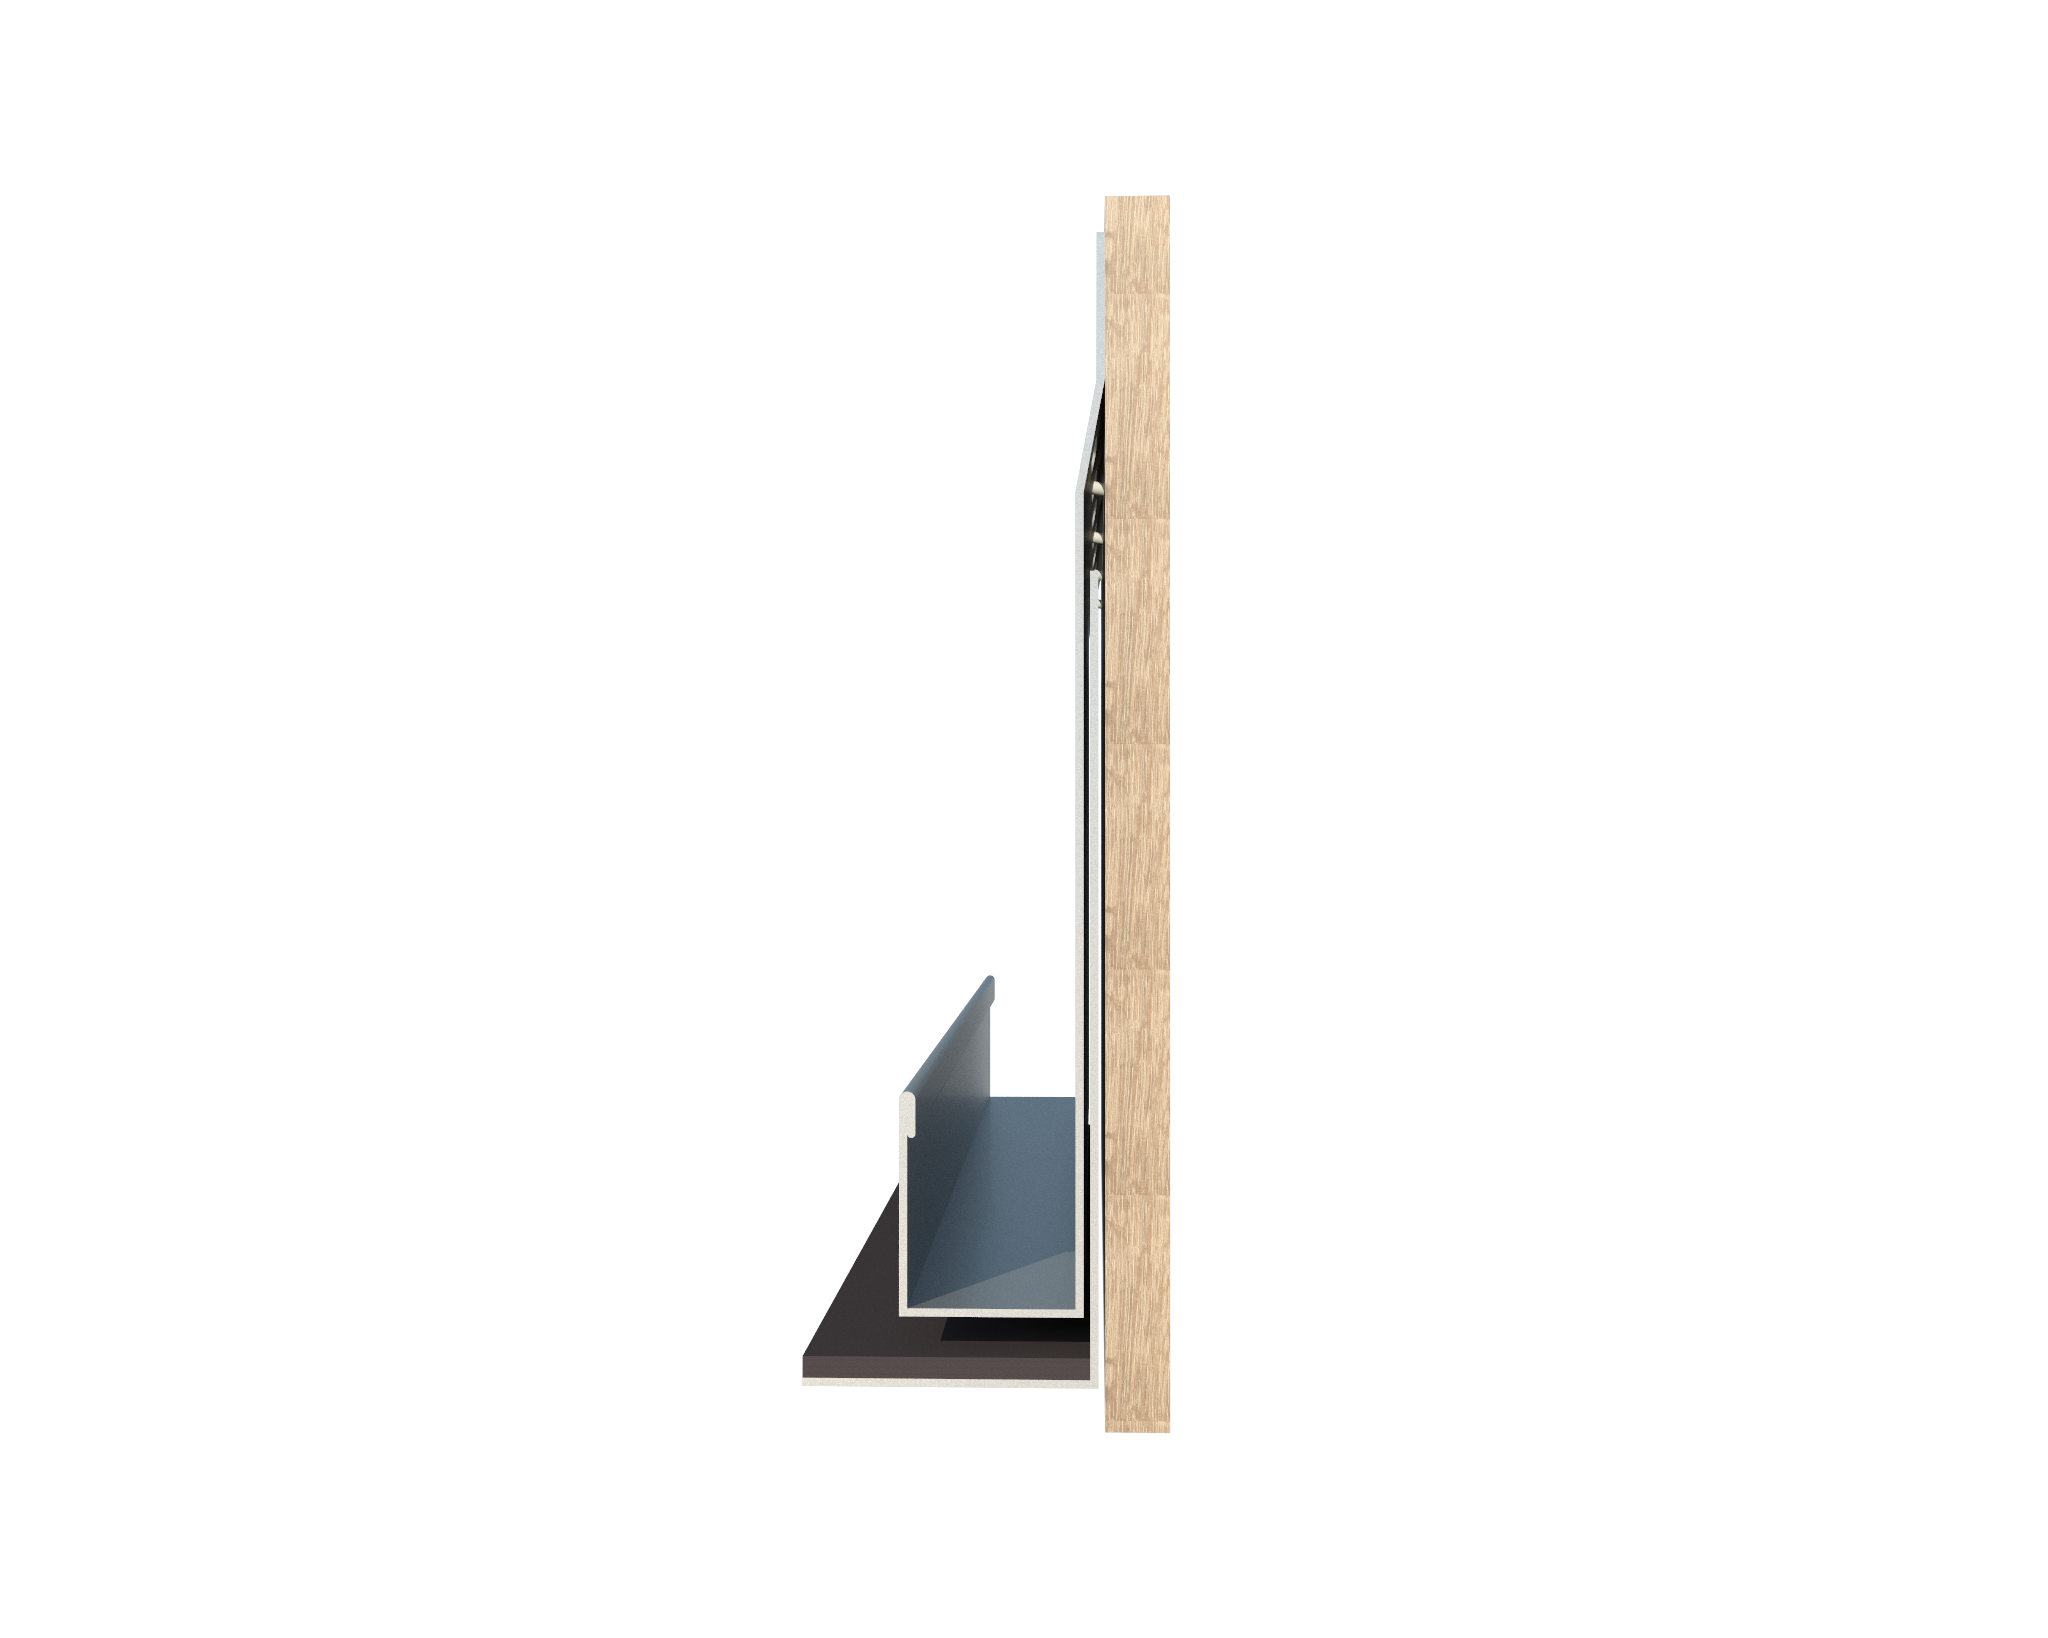 The Universal Step Flashing Channel eliminates these problems by installing the nail above the step-flashing